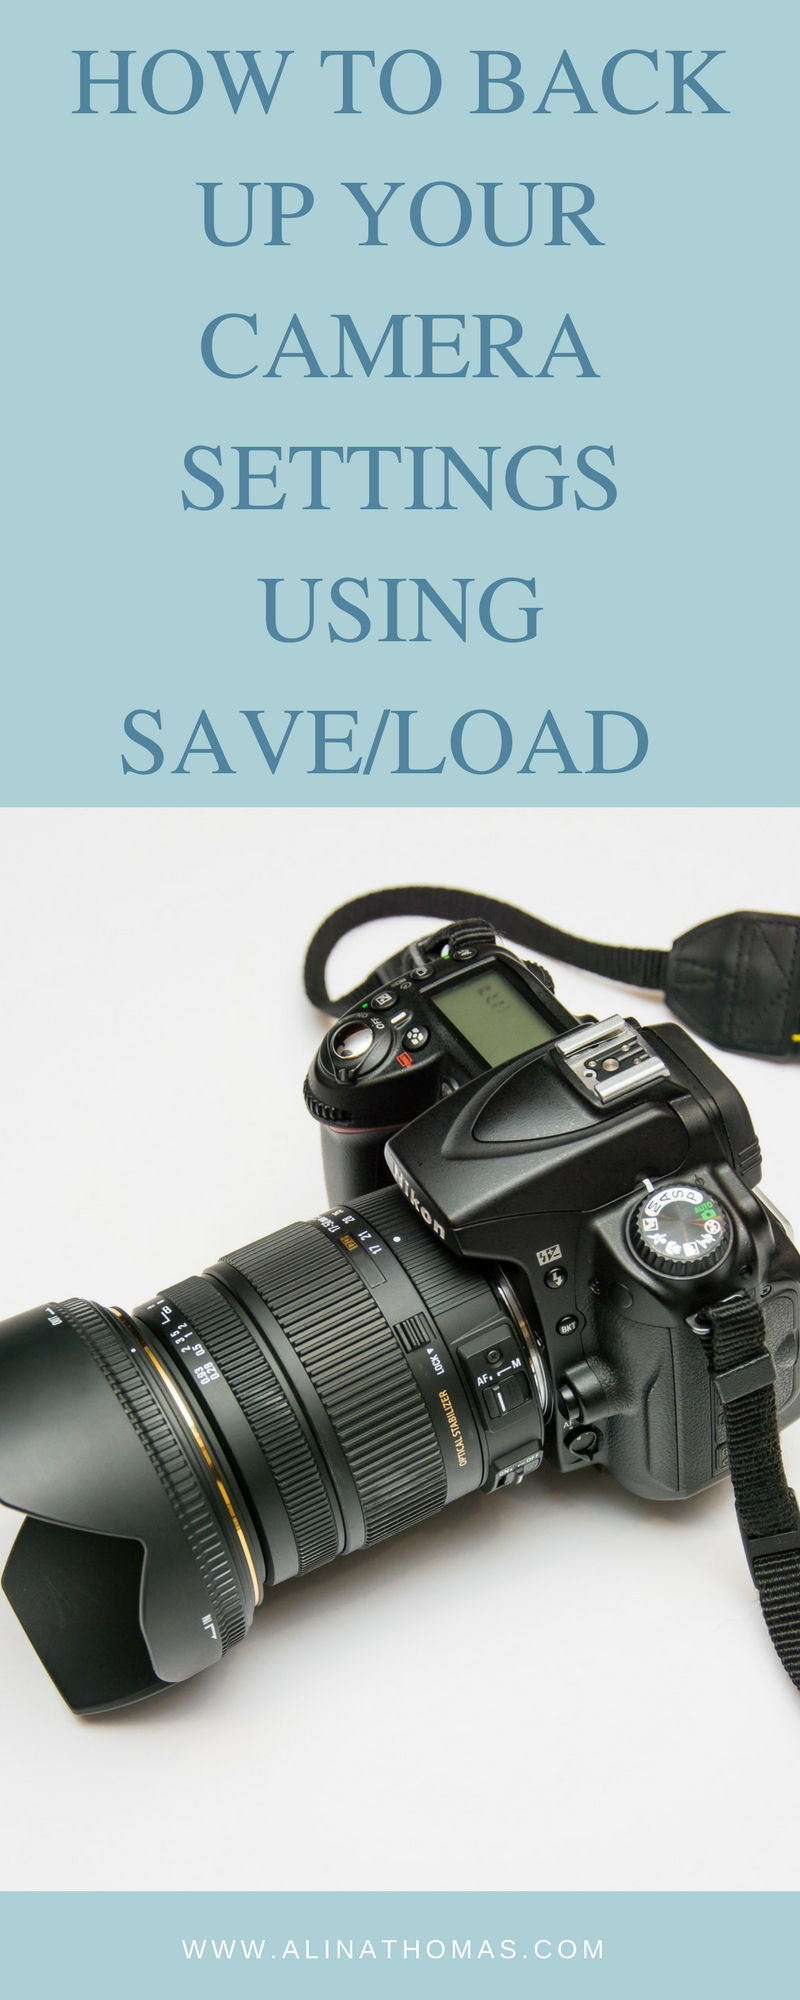 how to back up your camera settings using save/load